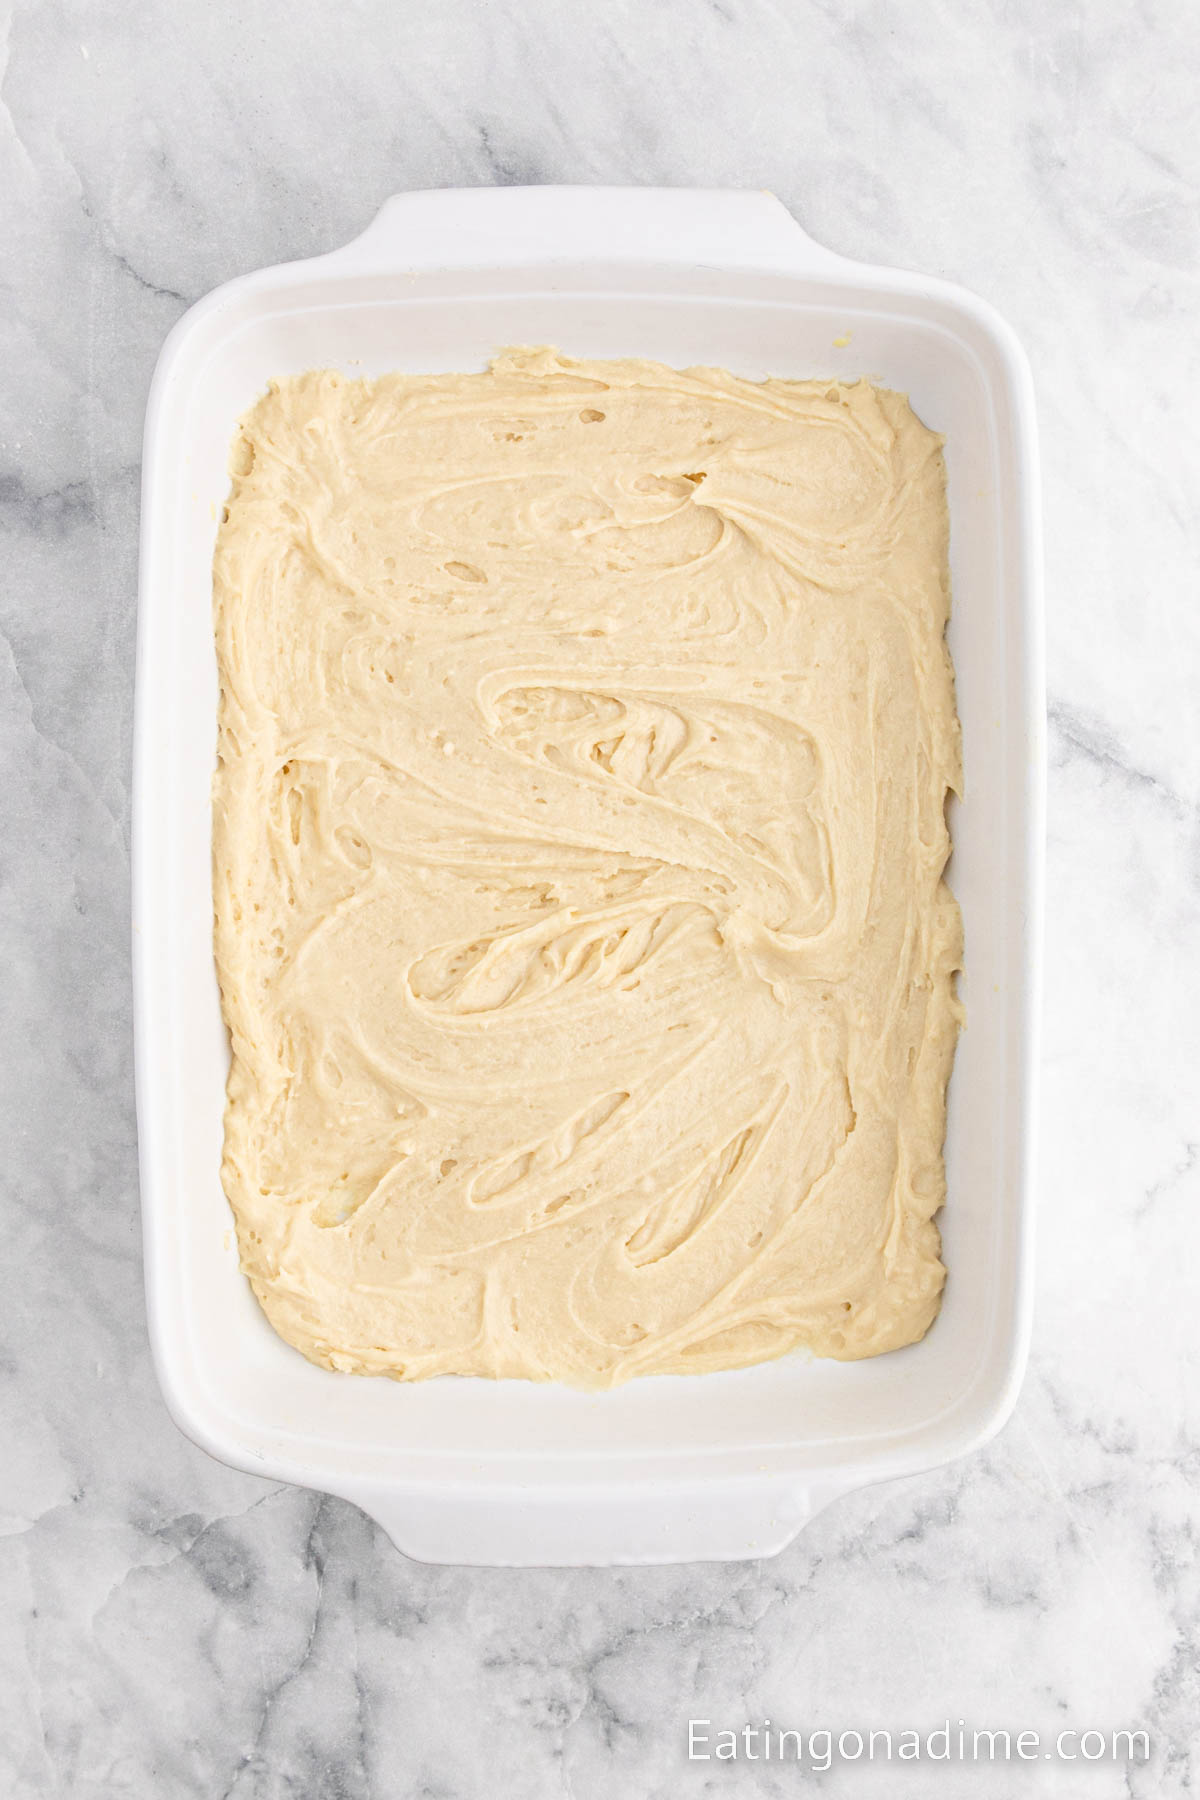 Spread the cake batter into baking dish